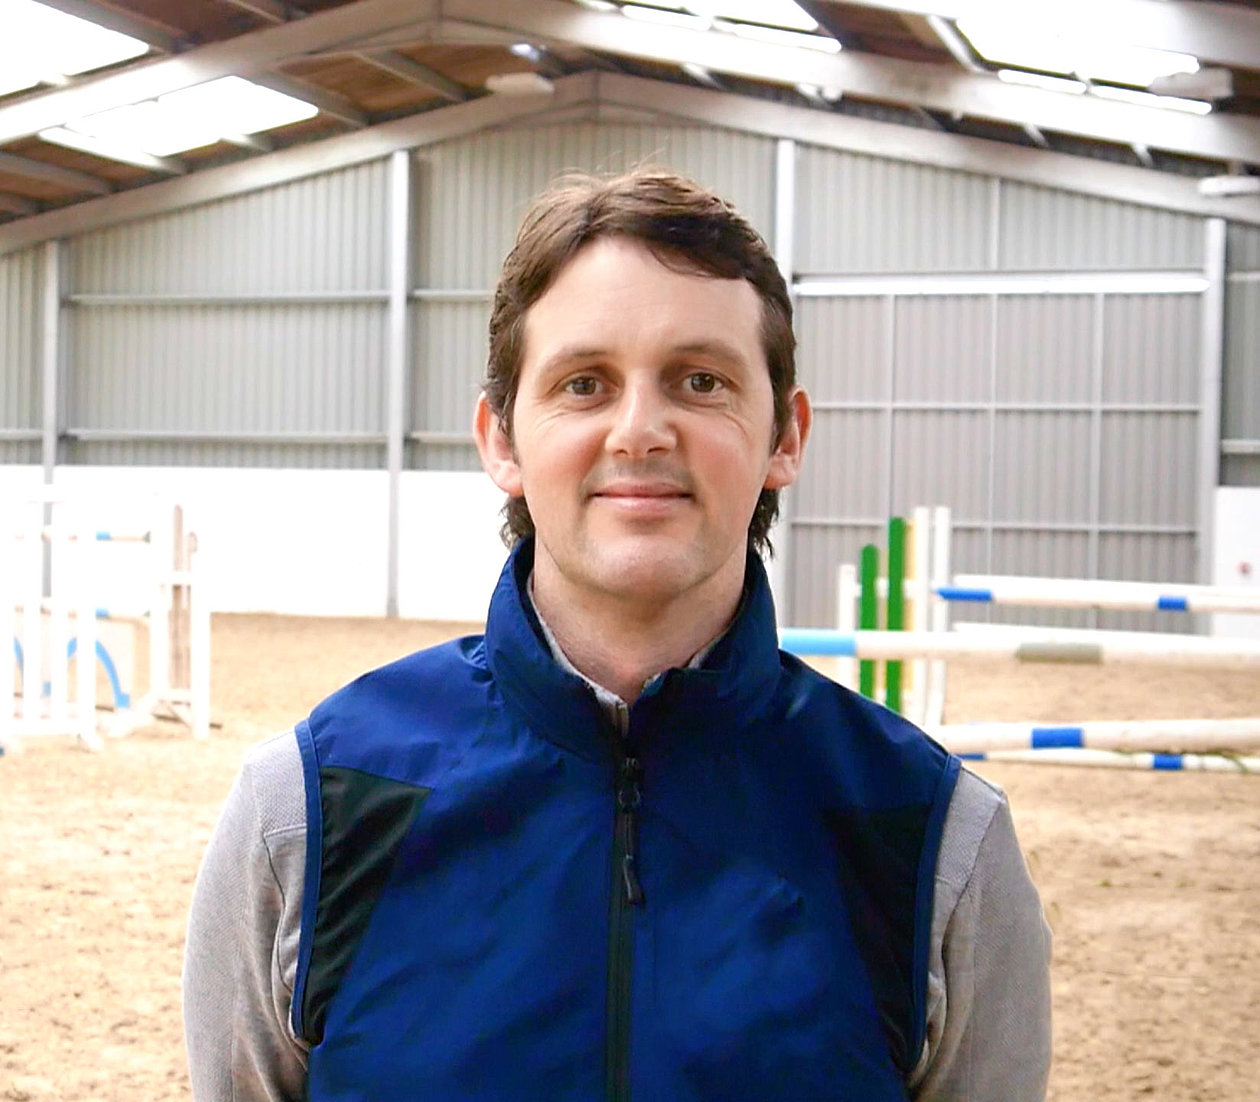 Interview with Billy Twomey - British show jumper